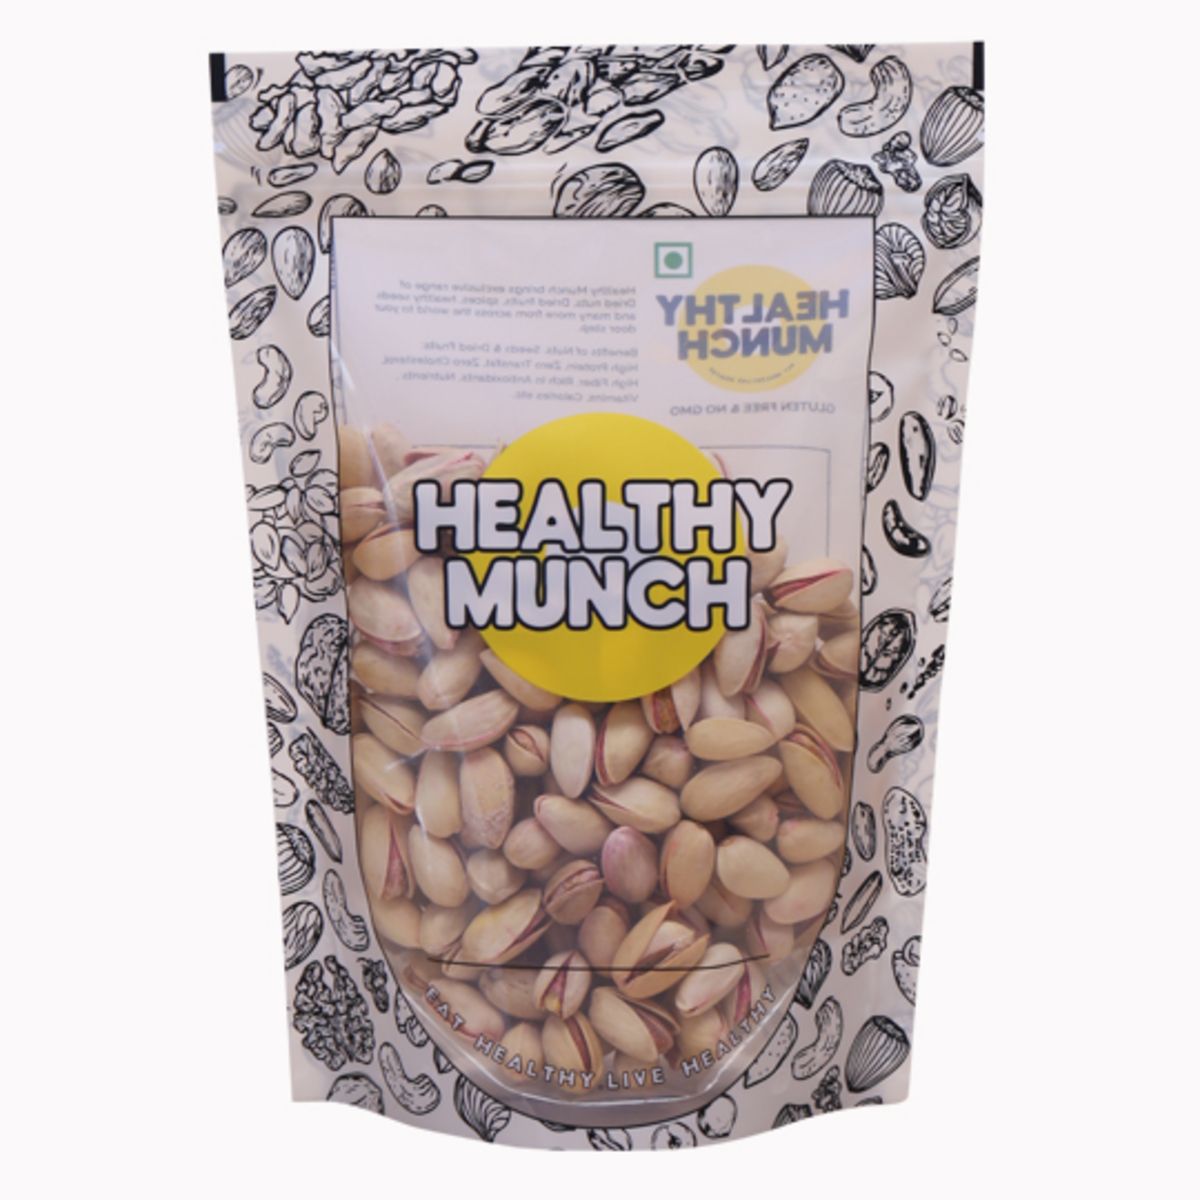 Buy Healthy Munch Premium Pistachios (Roasted & Salted) 250 gms at Best Price Online